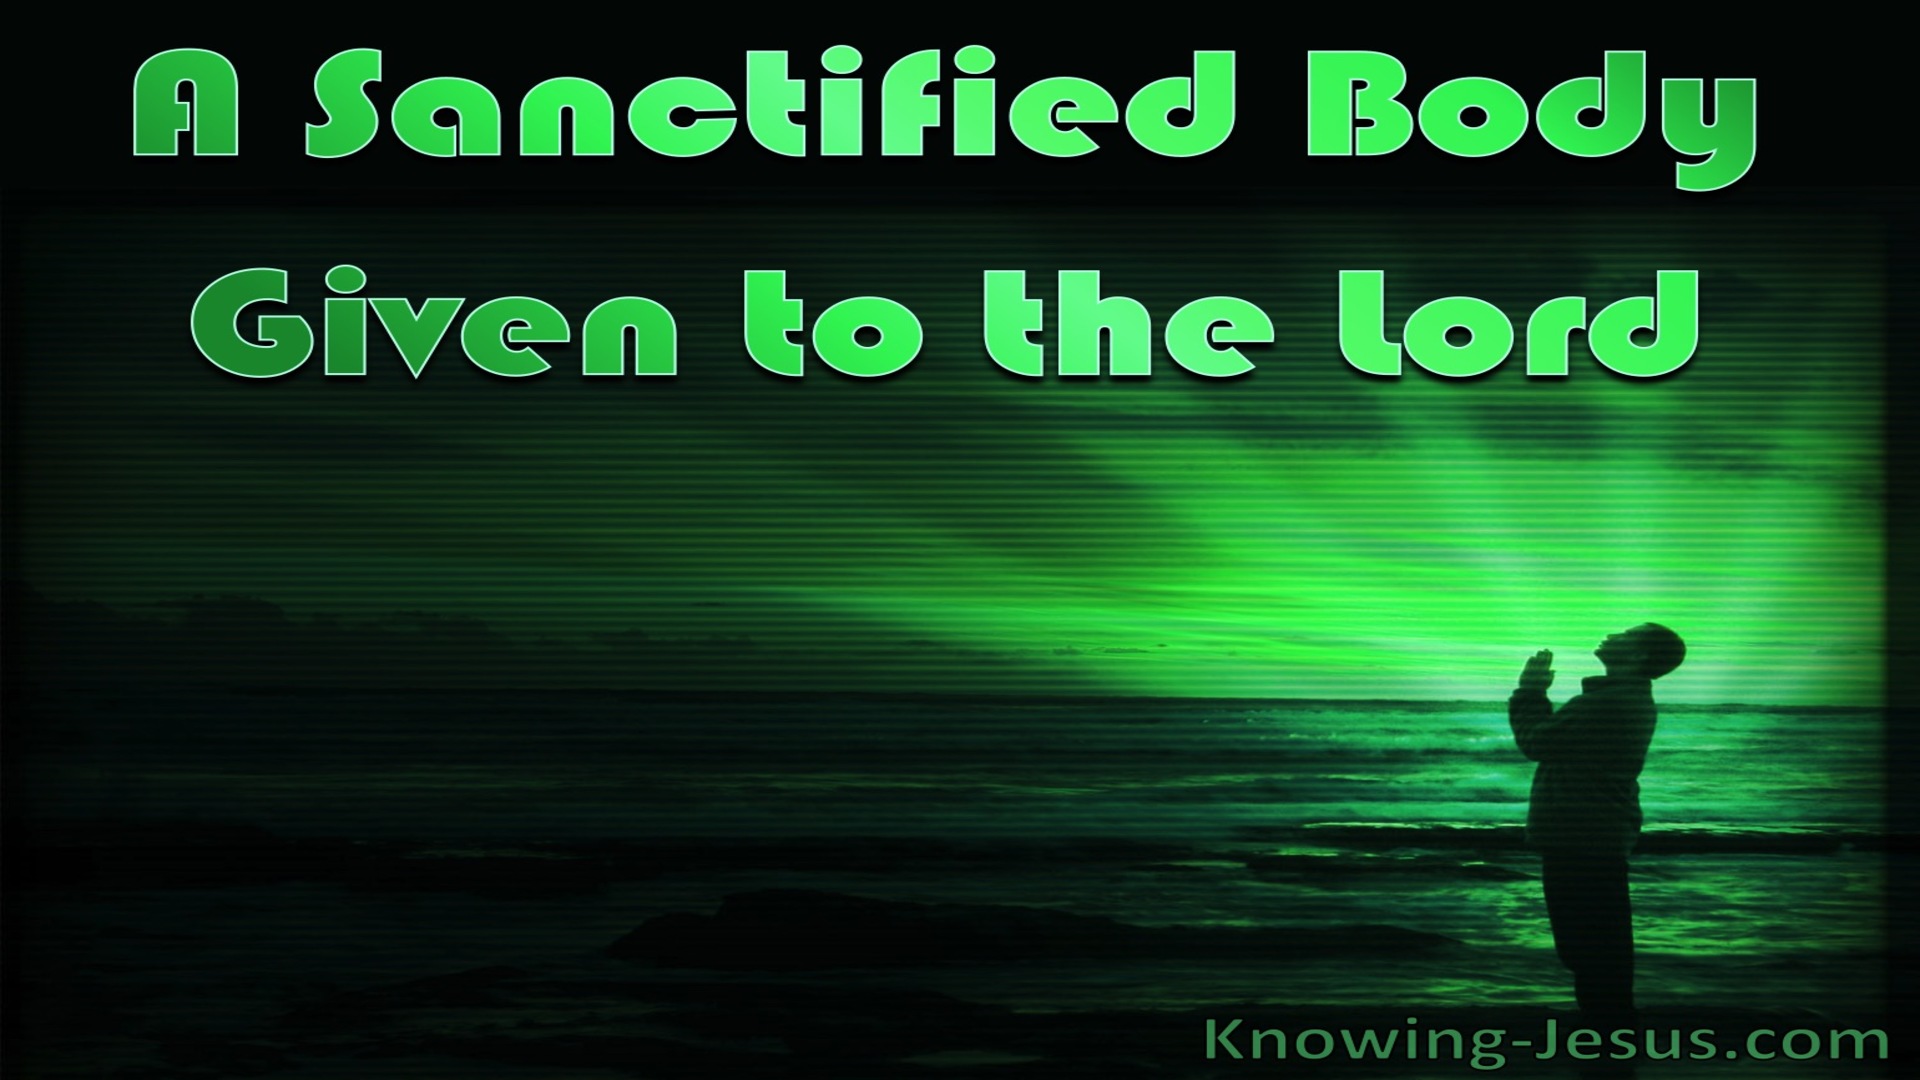 A Sanctified Body Given To the Lord (devotional)09-15 (green)